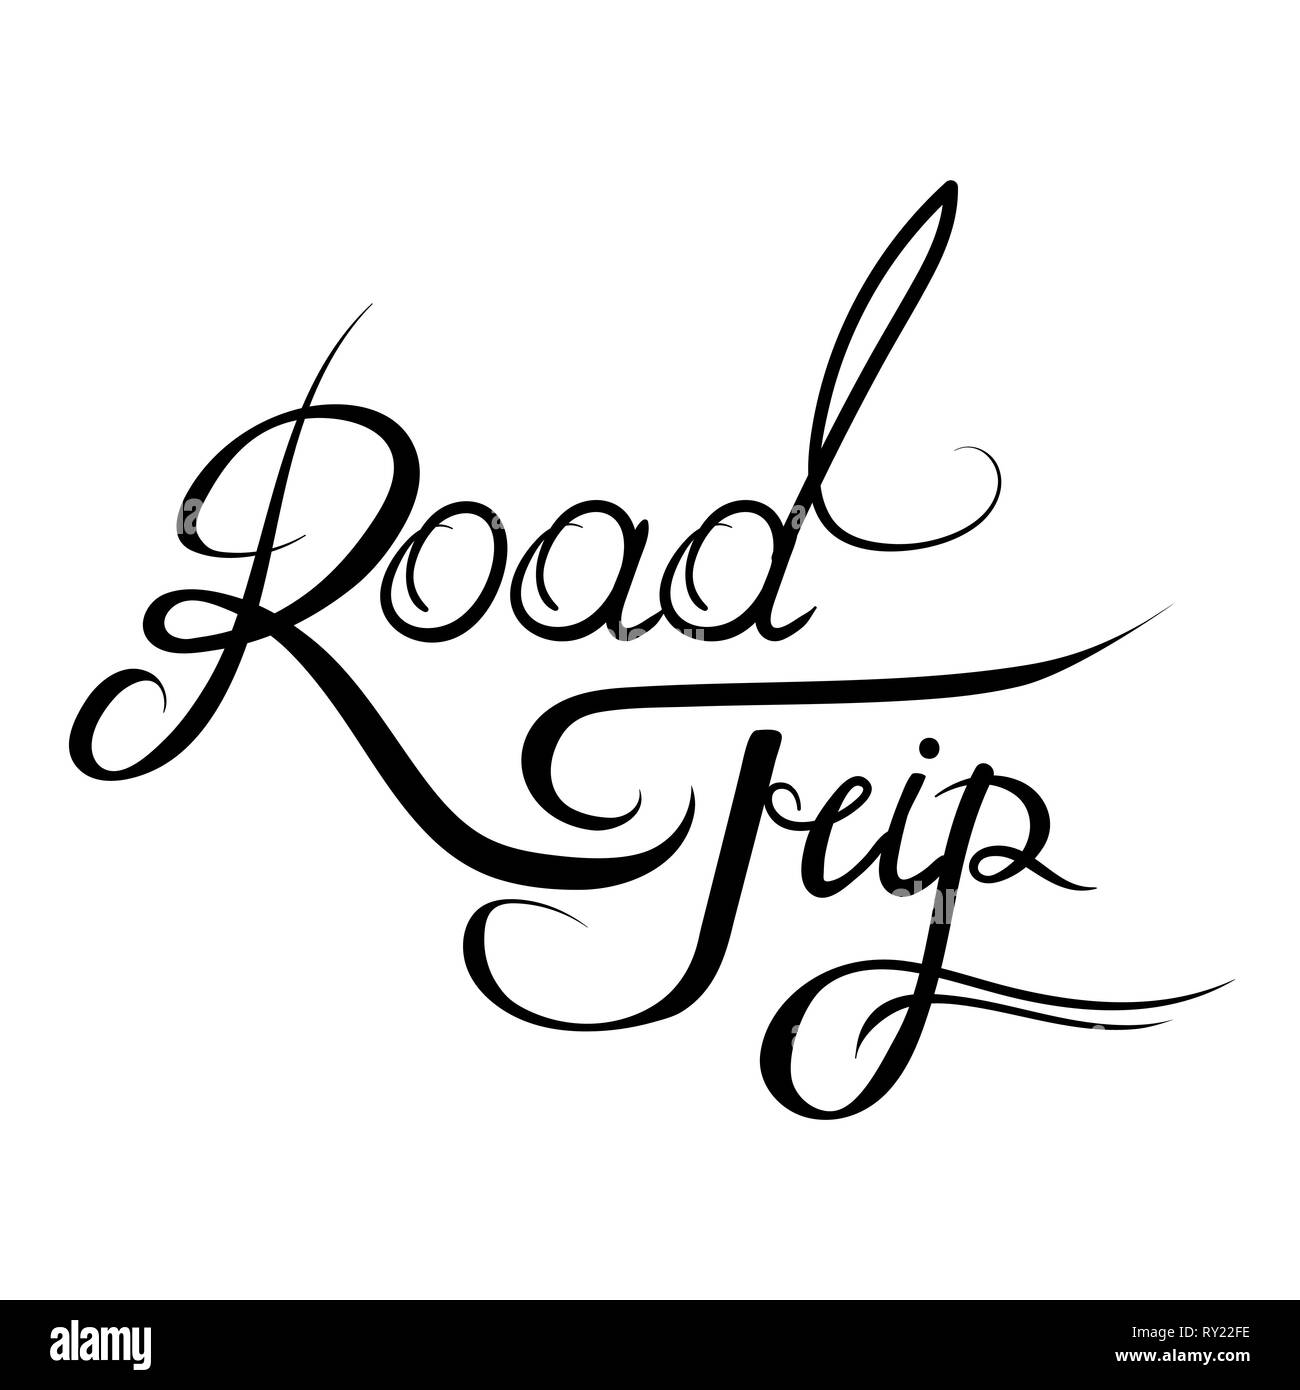 Hand Drawn Road Trip Lettering Isolated on White Background. Stock Vector